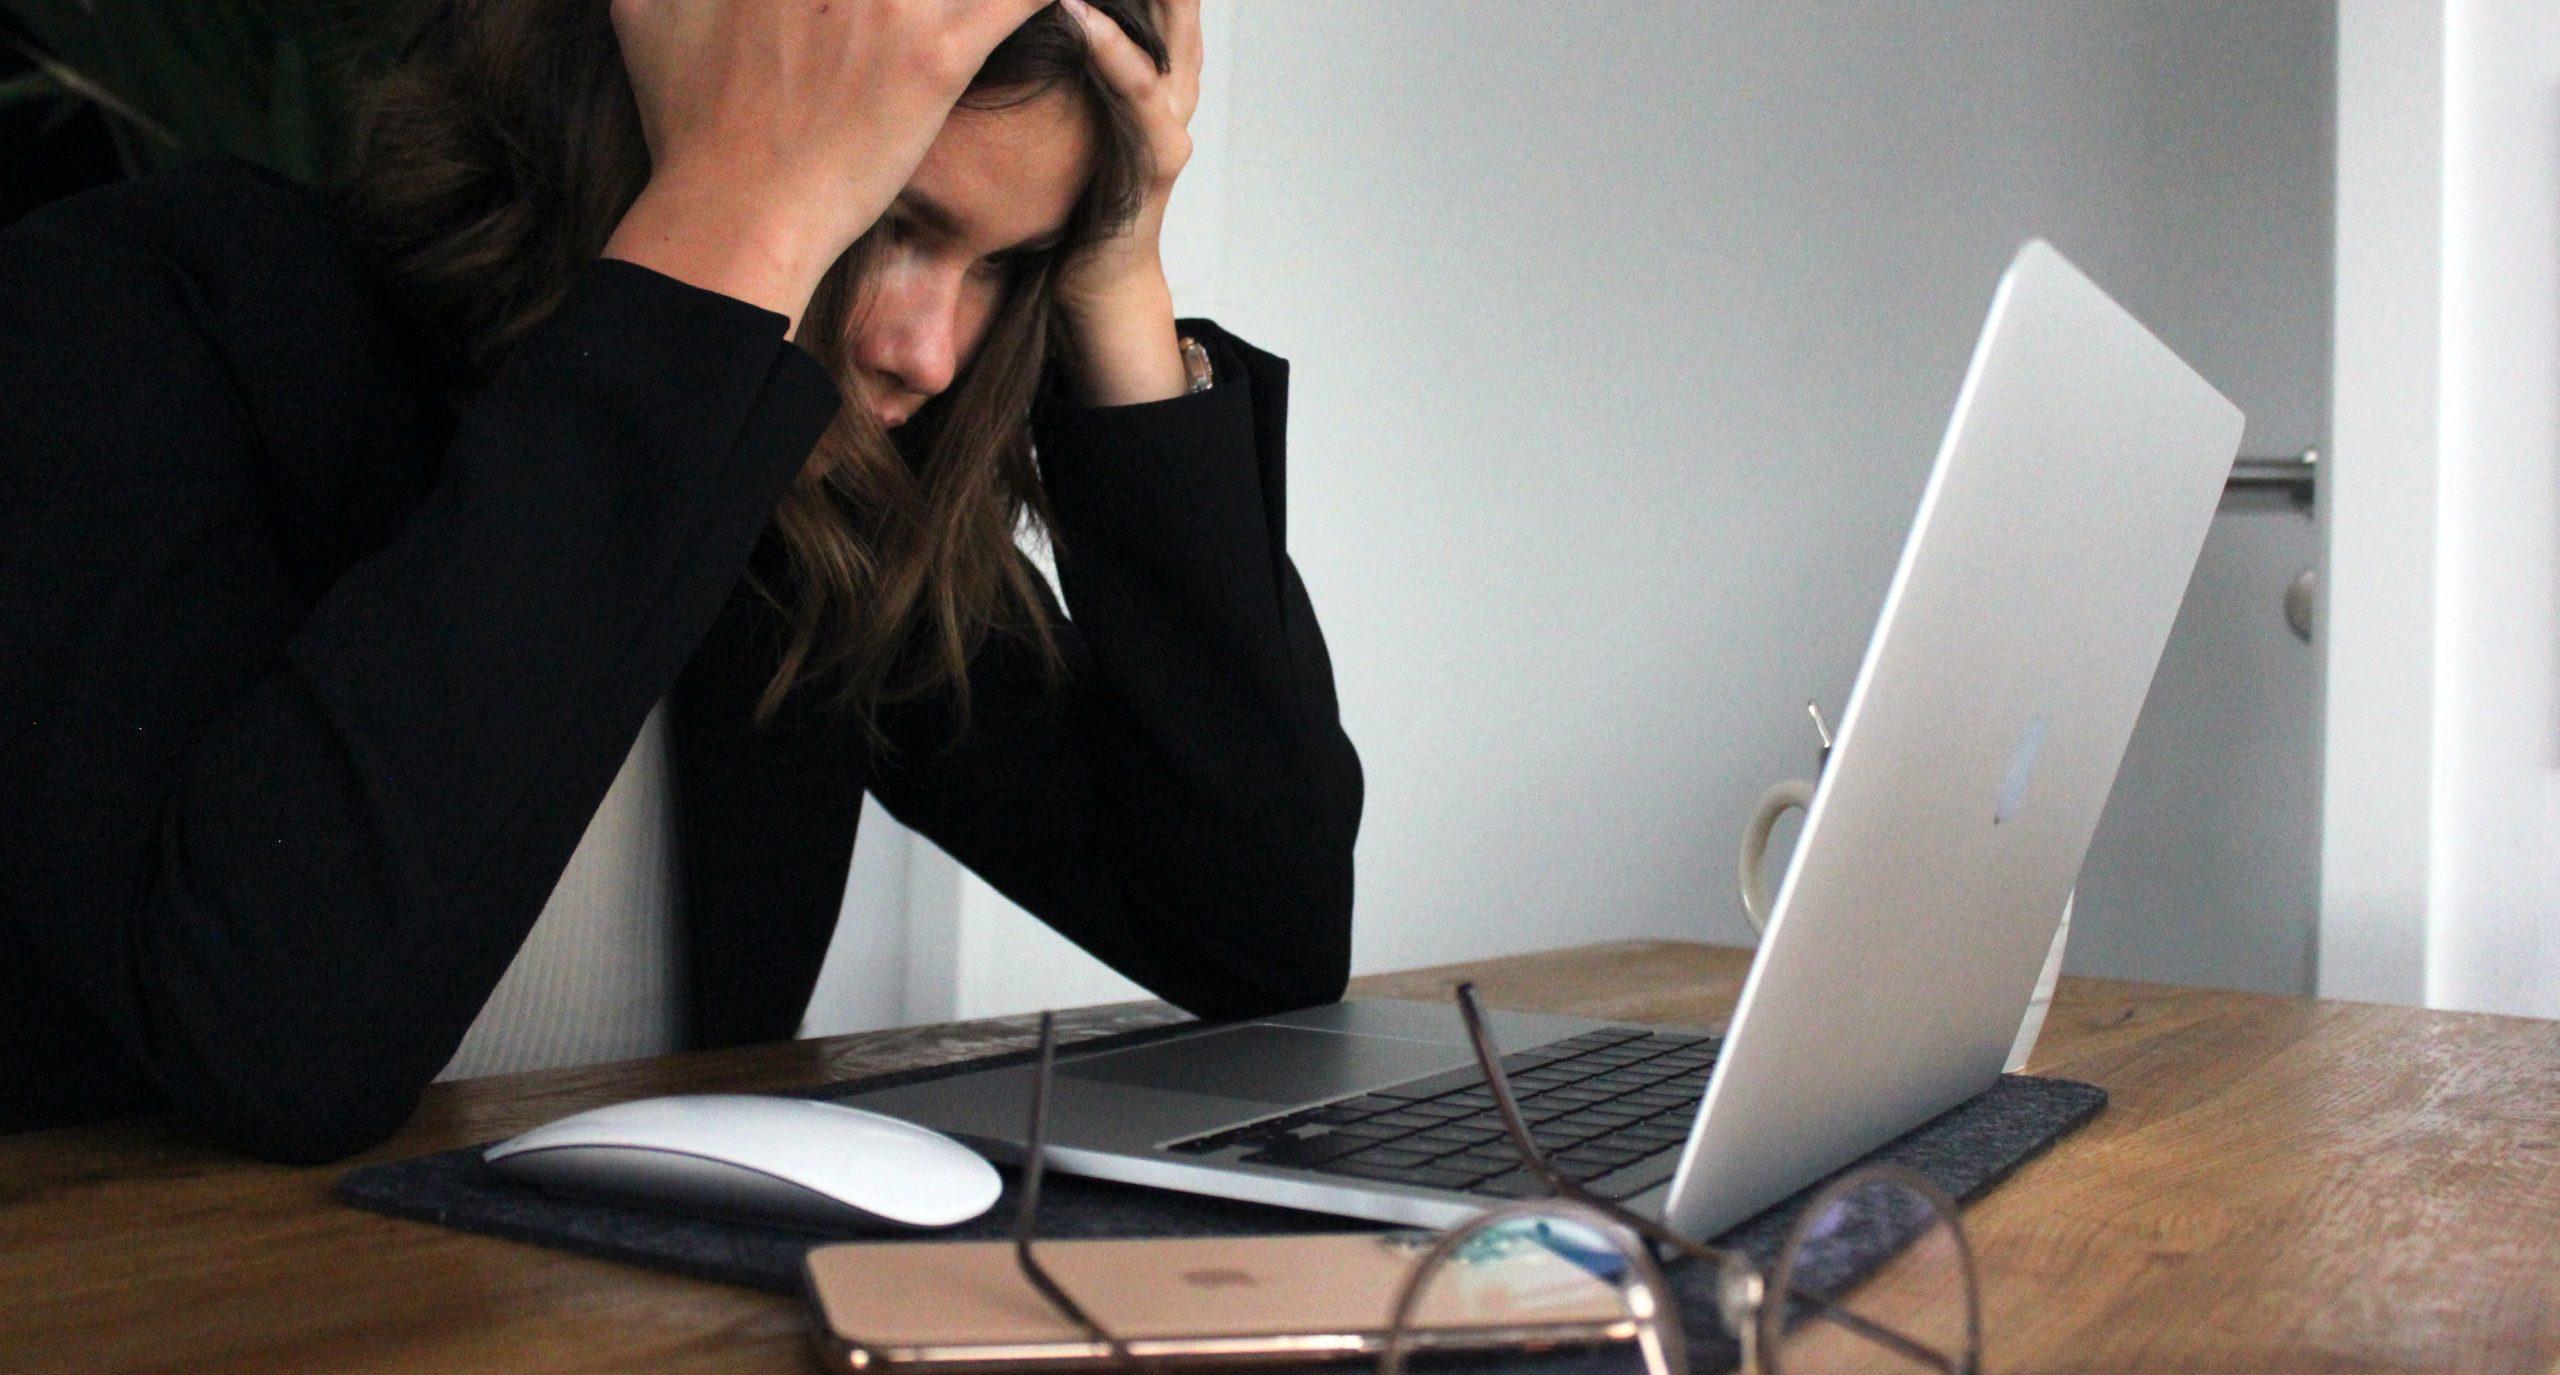 Woman sitting at desk in front of a laptop looking stressed.